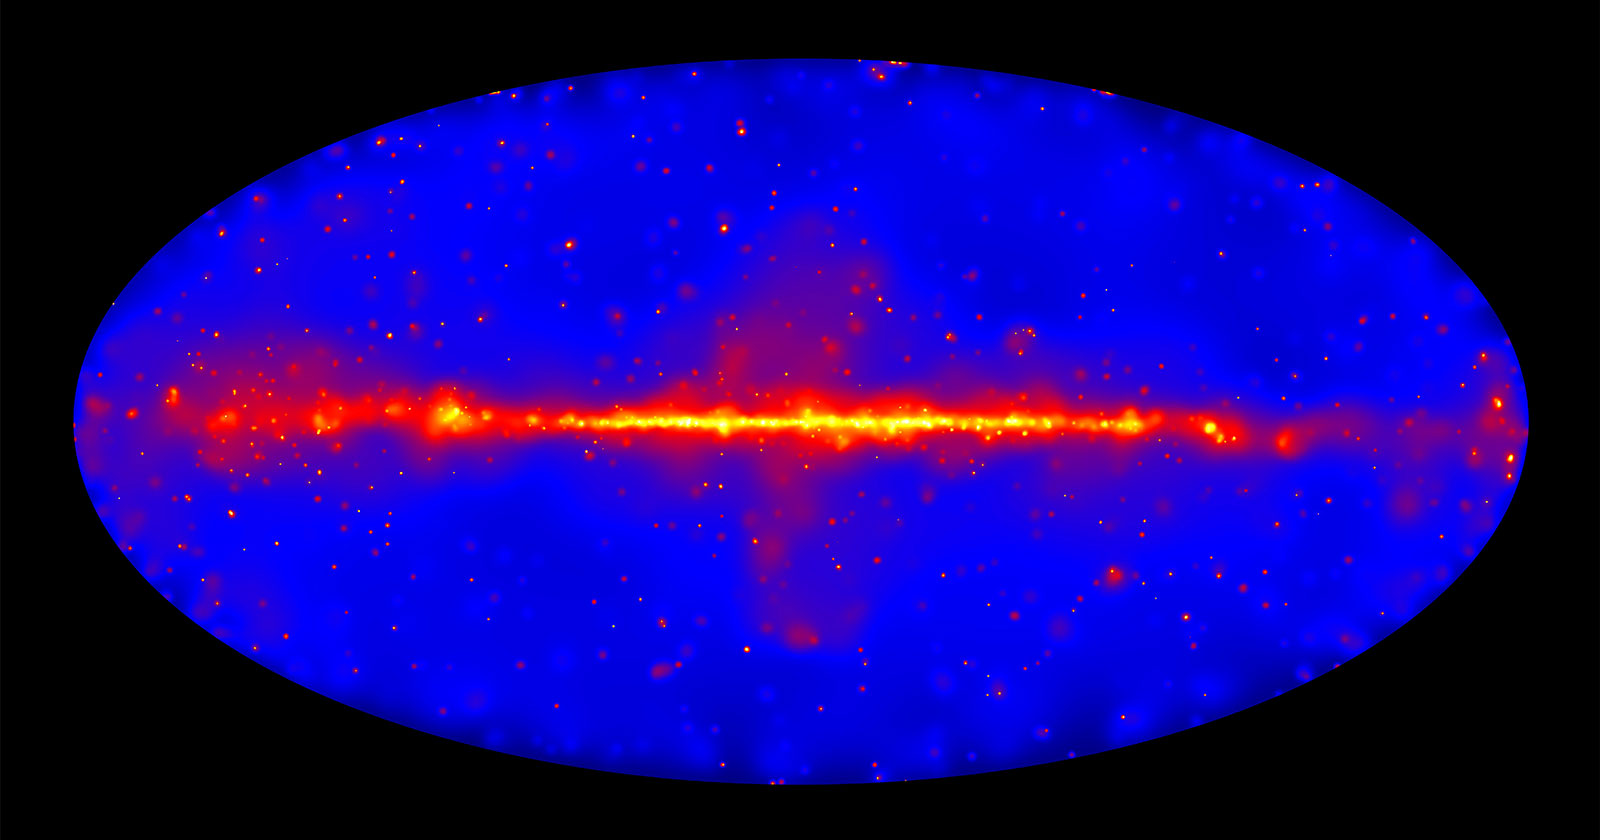 Band of bright red light representing high energy concentrations in our galaxy.